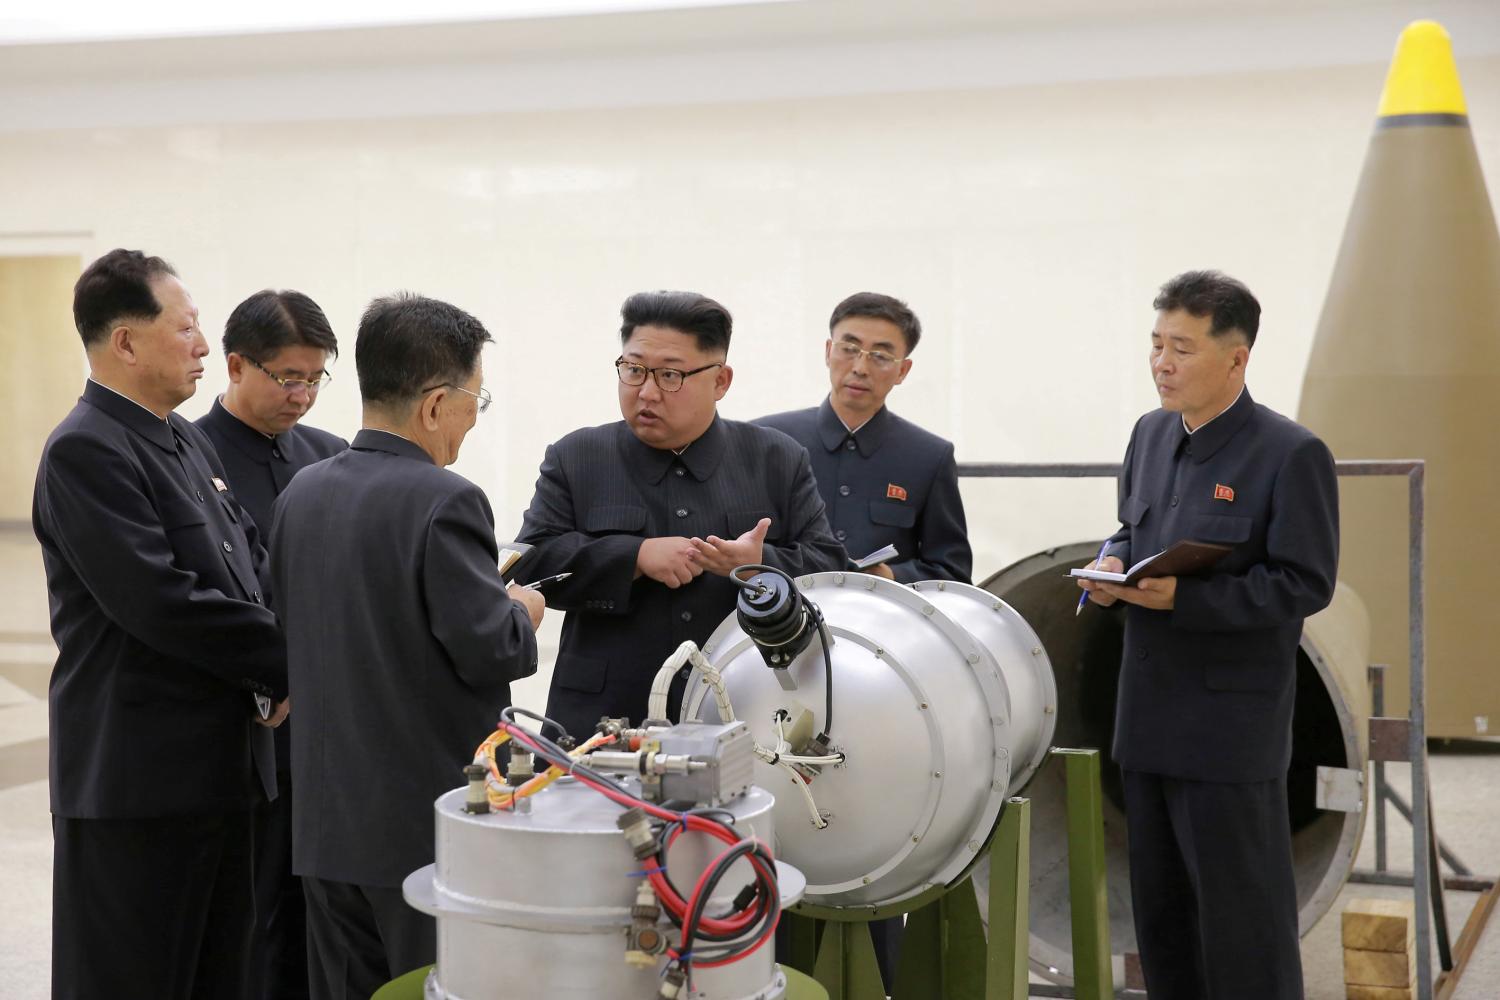 North Korean leader Kim Jong Un provides guidance with Ri Hong Sop (3rd L) and Hong Sung Mu (L) on a nuclear weapons program in this undated photo released by North Korea's Korean Central News Agency (KCNA) in Pyongyang September 3, 2017. KCNA via REUTERS ATTENTION EDITORS - THIS PICTURE WAS PROVIDED BY A THIRD PARTY. REUTERS IS UNABLE TO INDEPENDENTLY VERIFY THE AUTHENTICITY, CONTENT, LOCATION OR DATE OF THIS IMAGE. NOT FOR SALE FOR MARKETING OR ADVERTISING CAMPAIGNS. NO THIRD PARTY SALES. NOT FOR USE BY REUTERS THIRD PARTY DISTRIBUTORS. SOUTH KOREA OUT. NO COMMERCIAL OR EDITORIAL SALES IN SOUTH KOREA. THIS PICTURE IS DISTRIBUTED EXACTLY AS RECEIVED BY REUTERS, AS A SERVICE TO CLIENTS.